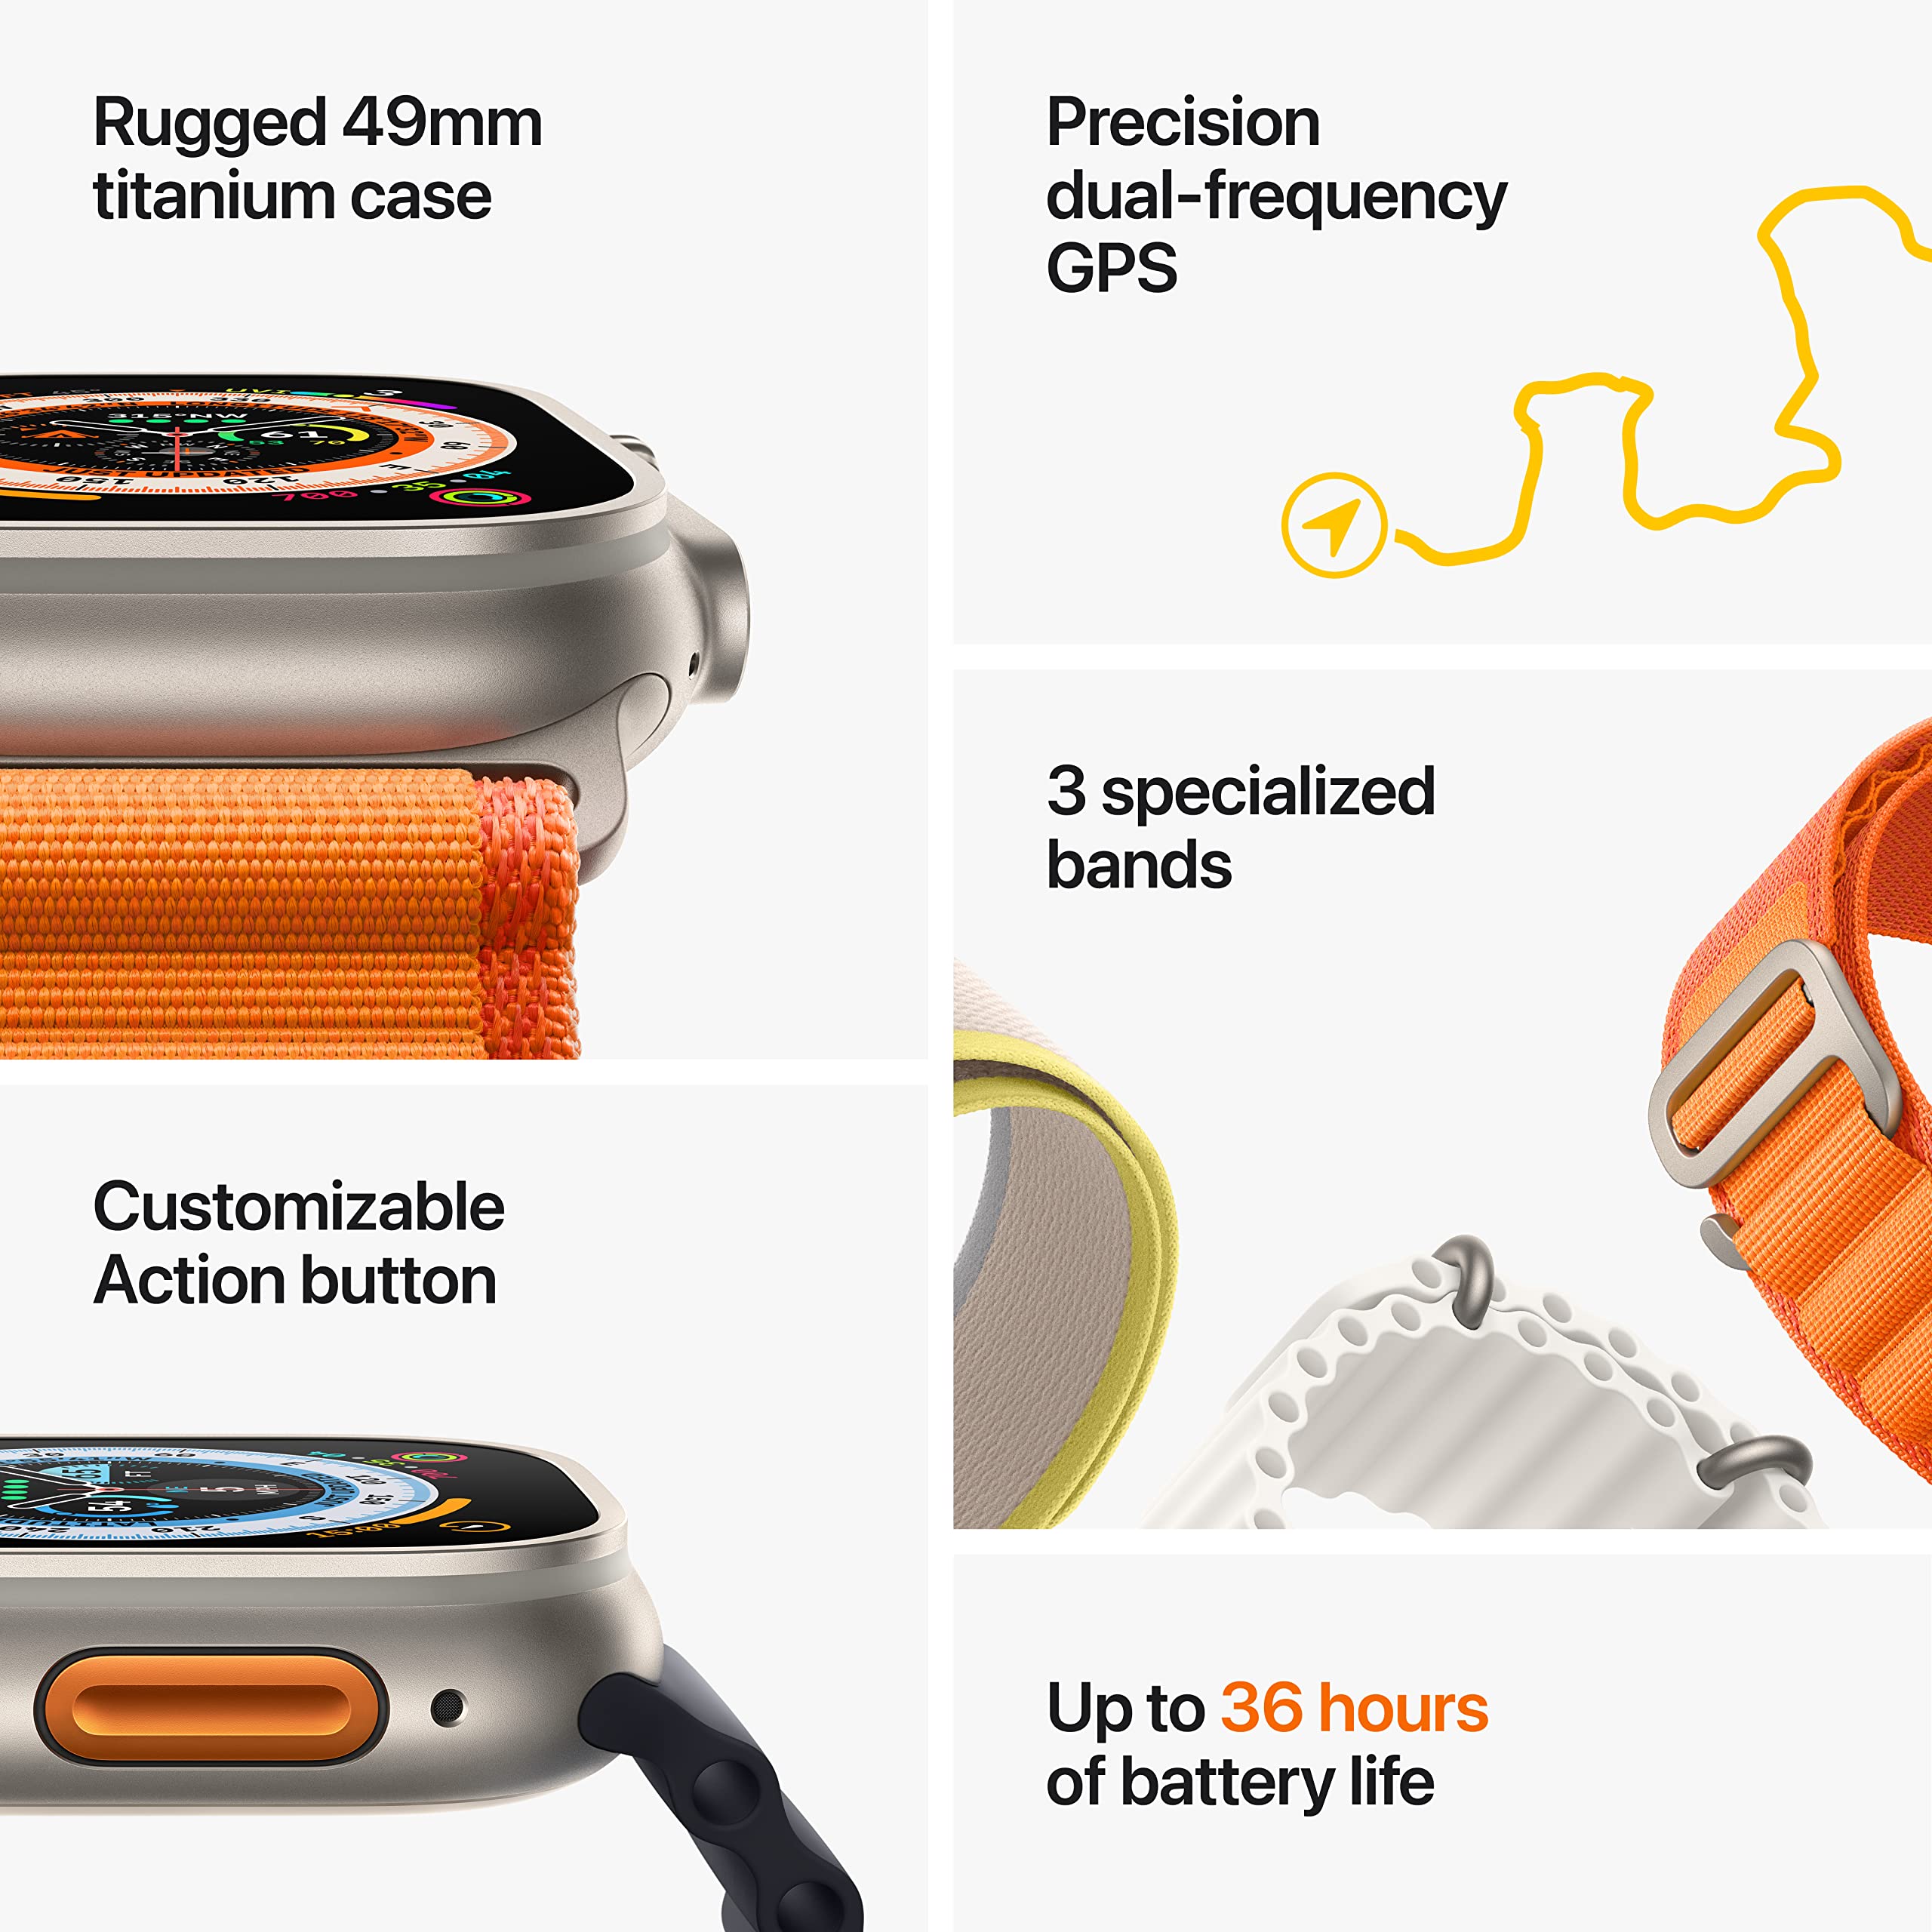 Apple Watch Ultra [GPS + Cellular 49mm] Smart Watch w/Rugged Titanium Case & Orange Alpine Loop Large. Fitness Tracker, Precision GPS, Action Button, Extra-Long Battery Life, Brighter Retina Display